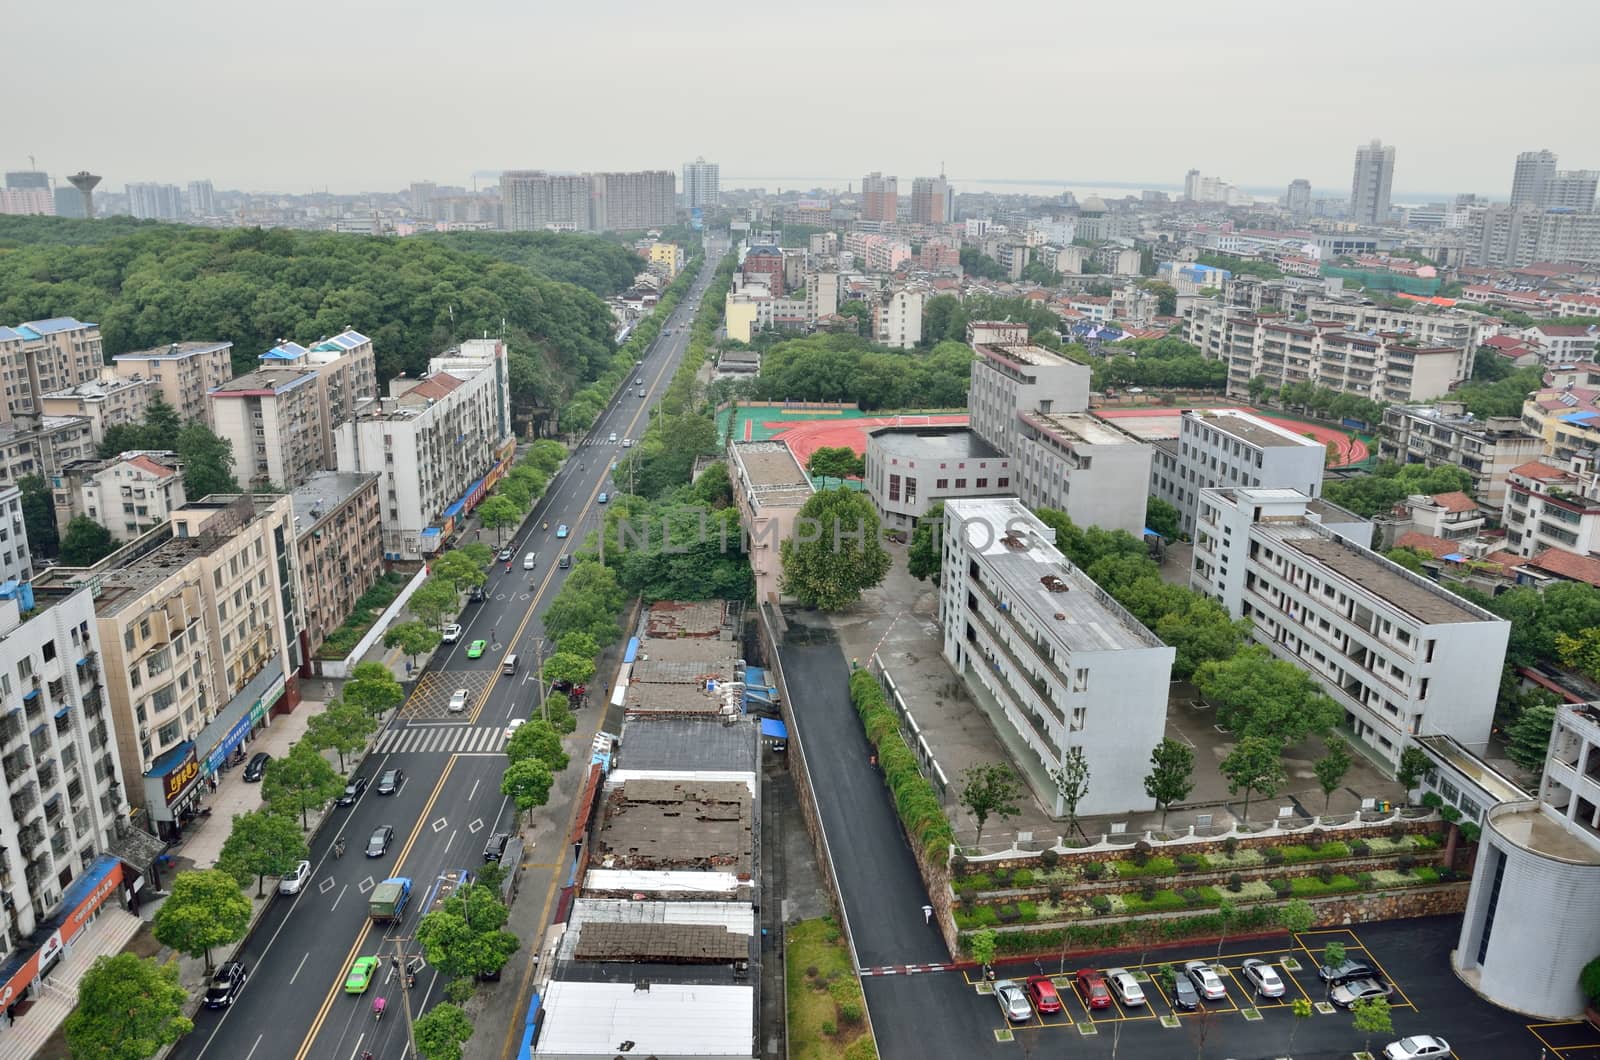 General cityscape of Yueyang city in Hunan province, China. City center with schools, buildings and main street.